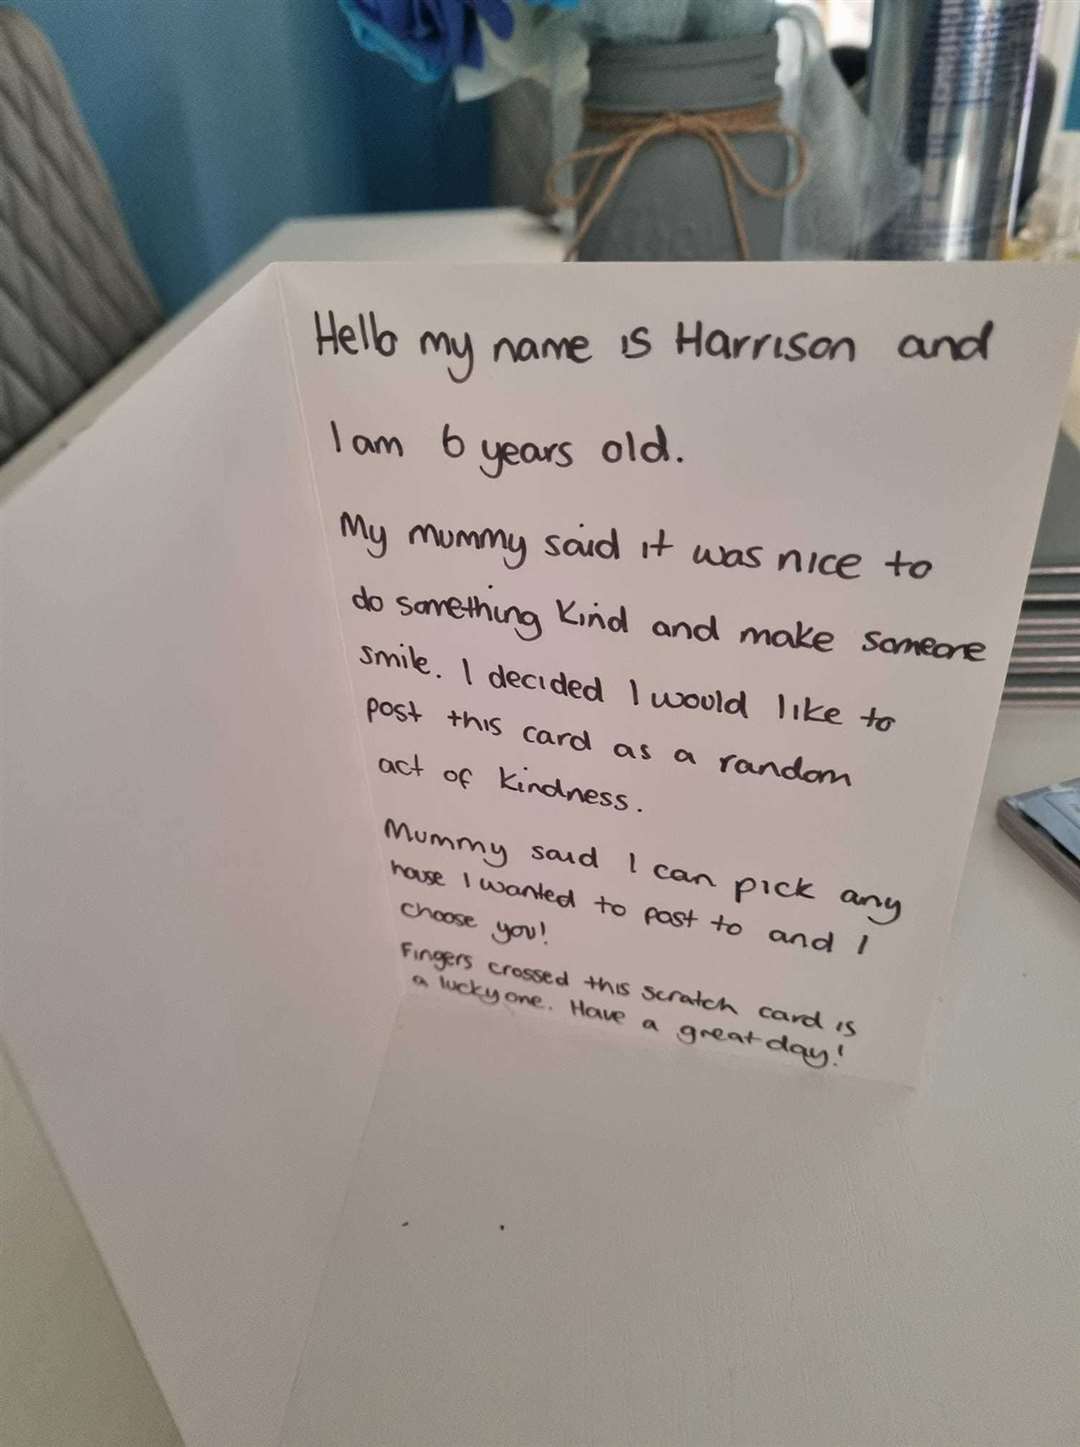 The card Daniel Ward received in Rock Road, Sittingbourne, from youngster Harrison Hughes, 6